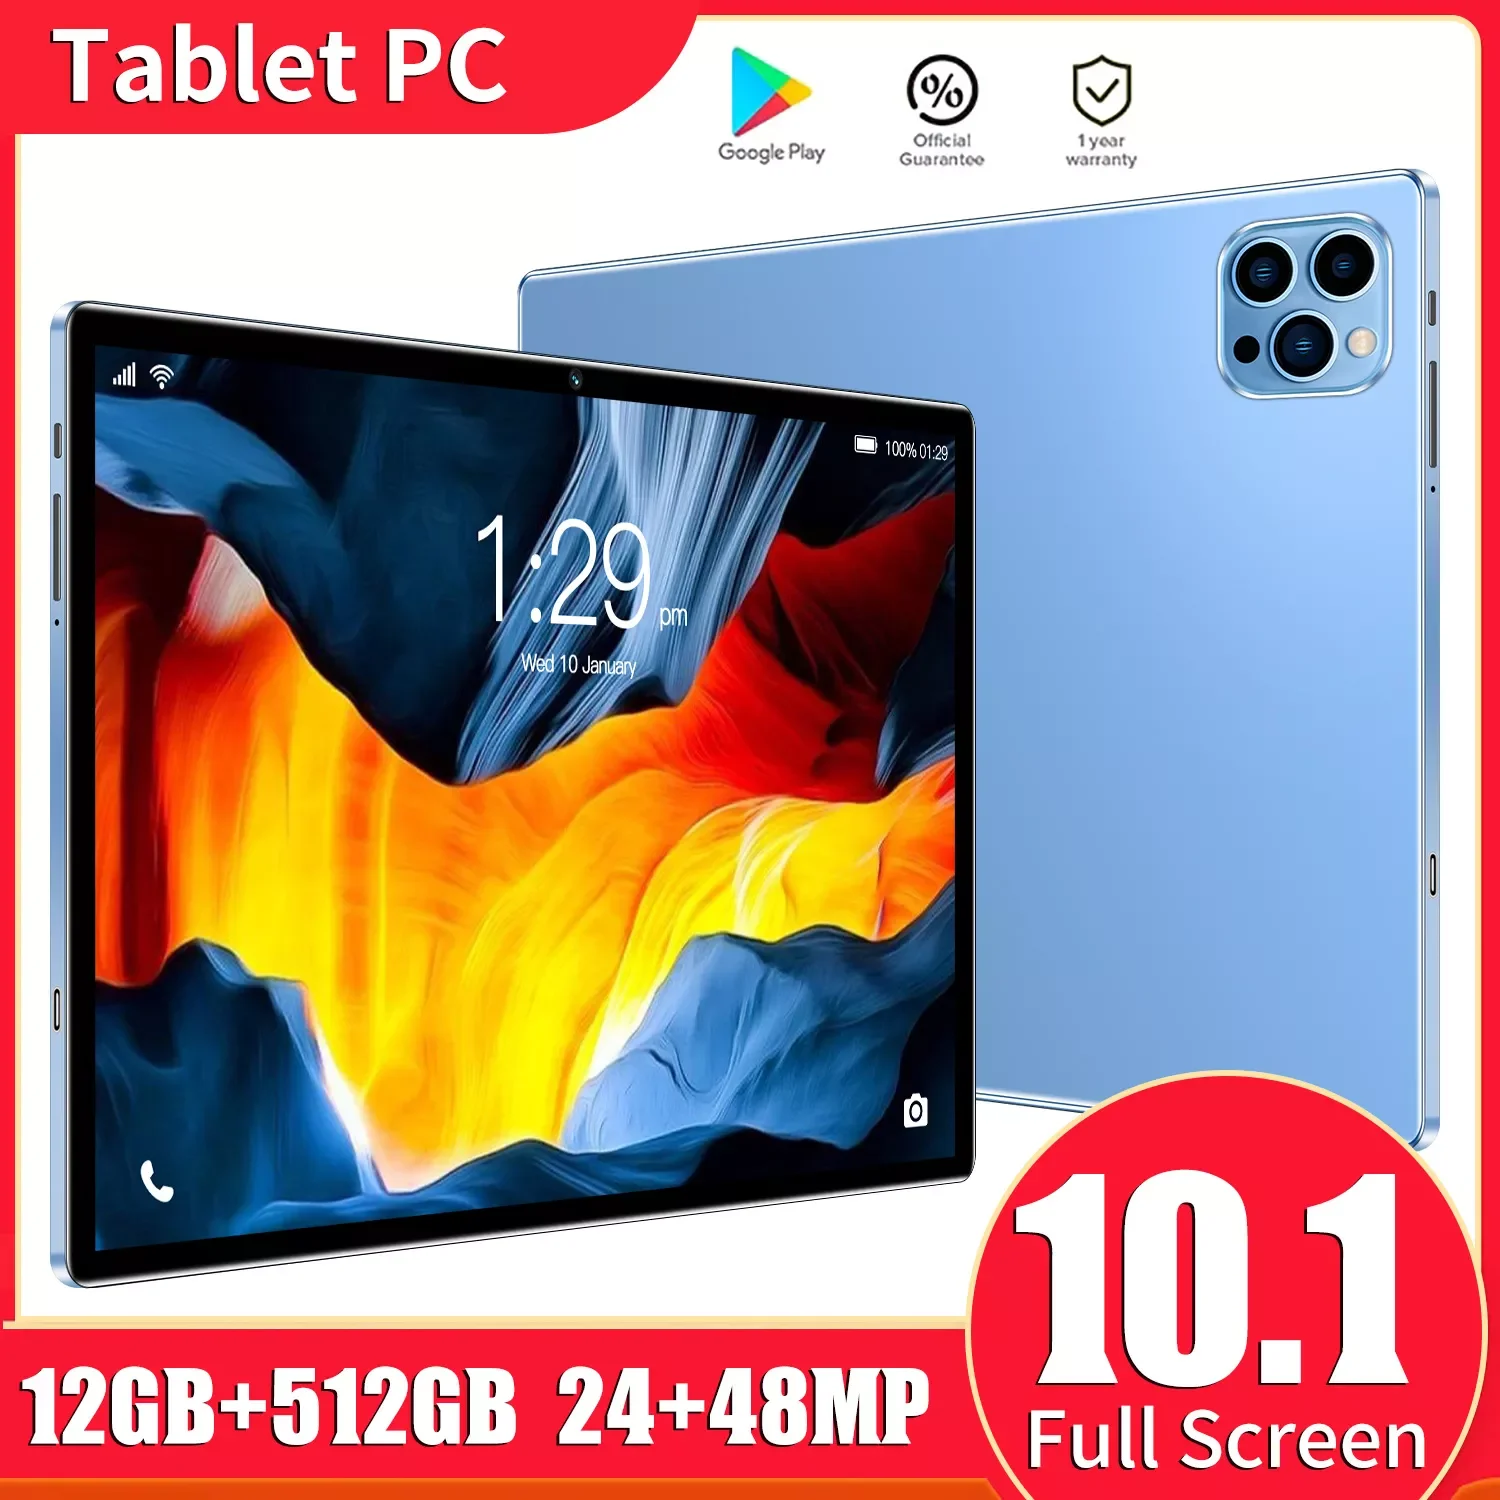 

Tablet Pad X10.1"1200x800 IPS Screen Unisoc T618 Octa Core Android 12 OS 12GB RAM512GB ROM Dual Band Wifi Tablet PC